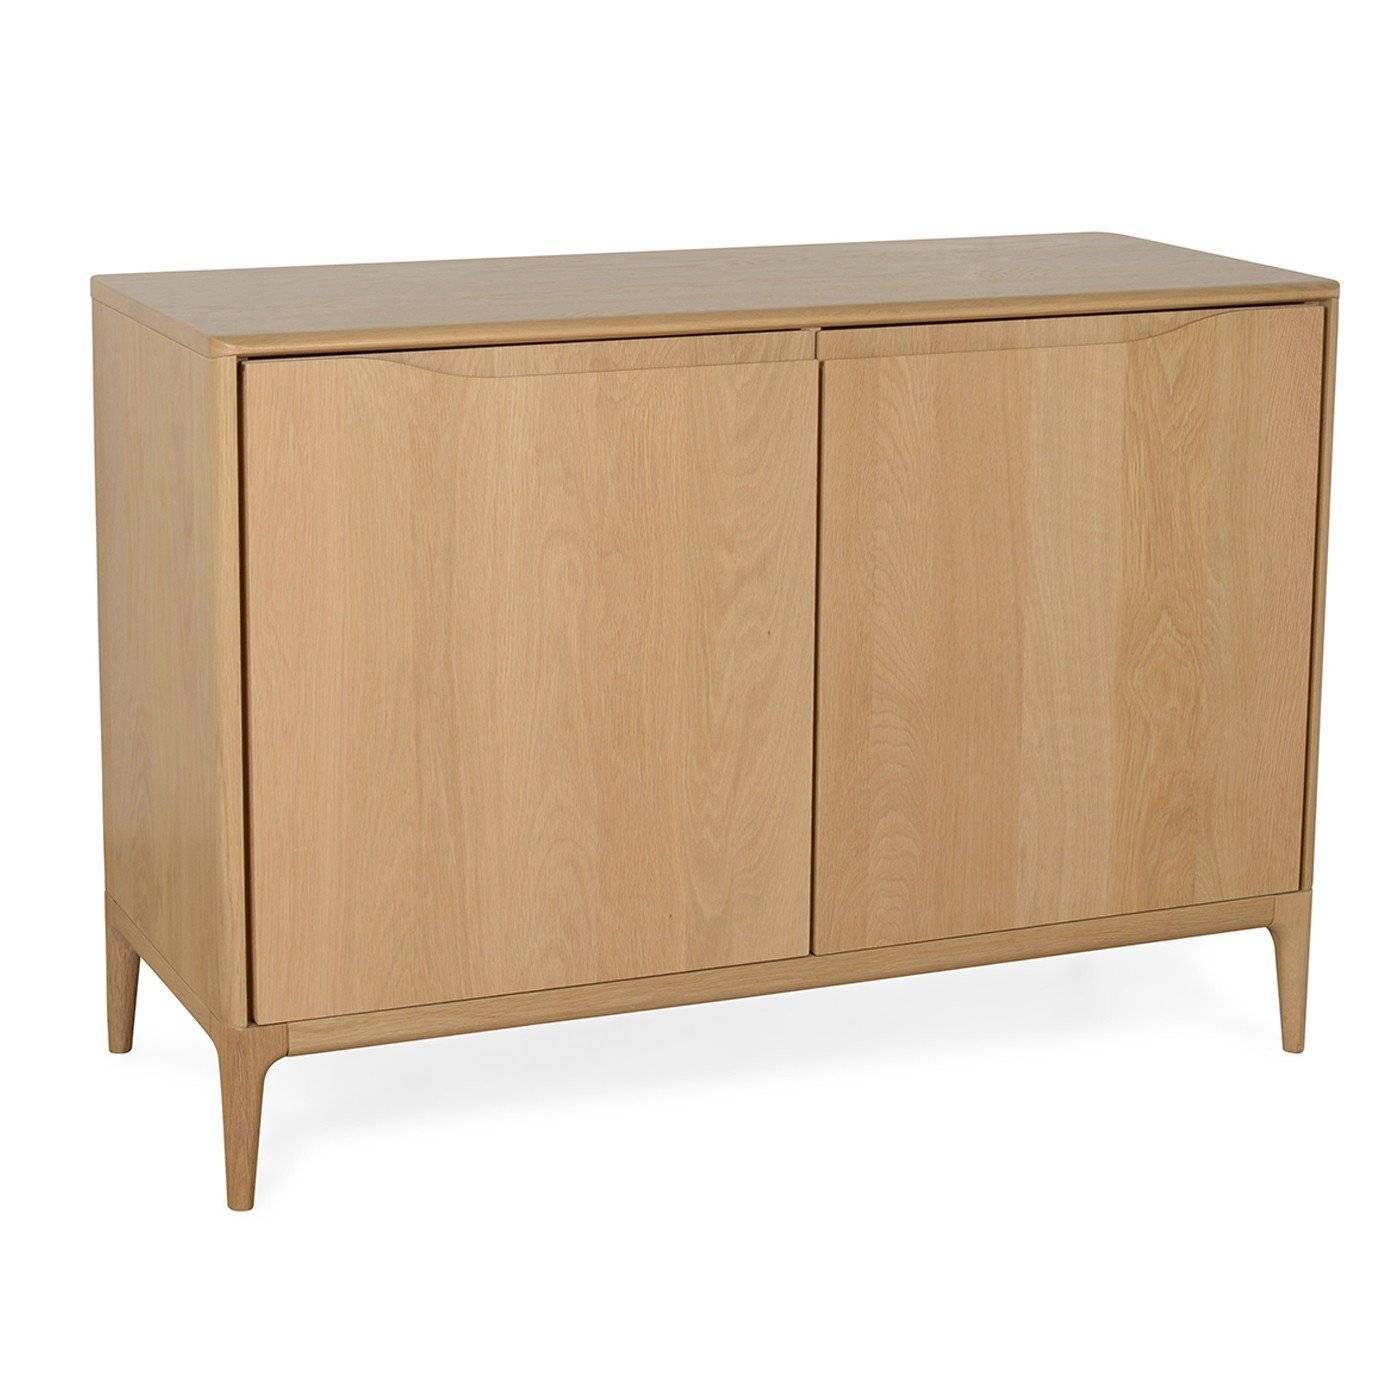 Designer Sideboards | Modern & Contemporary Sideboards | Heal's Pertaining To Contemporary Oak Sideboards (View 4 of 15)